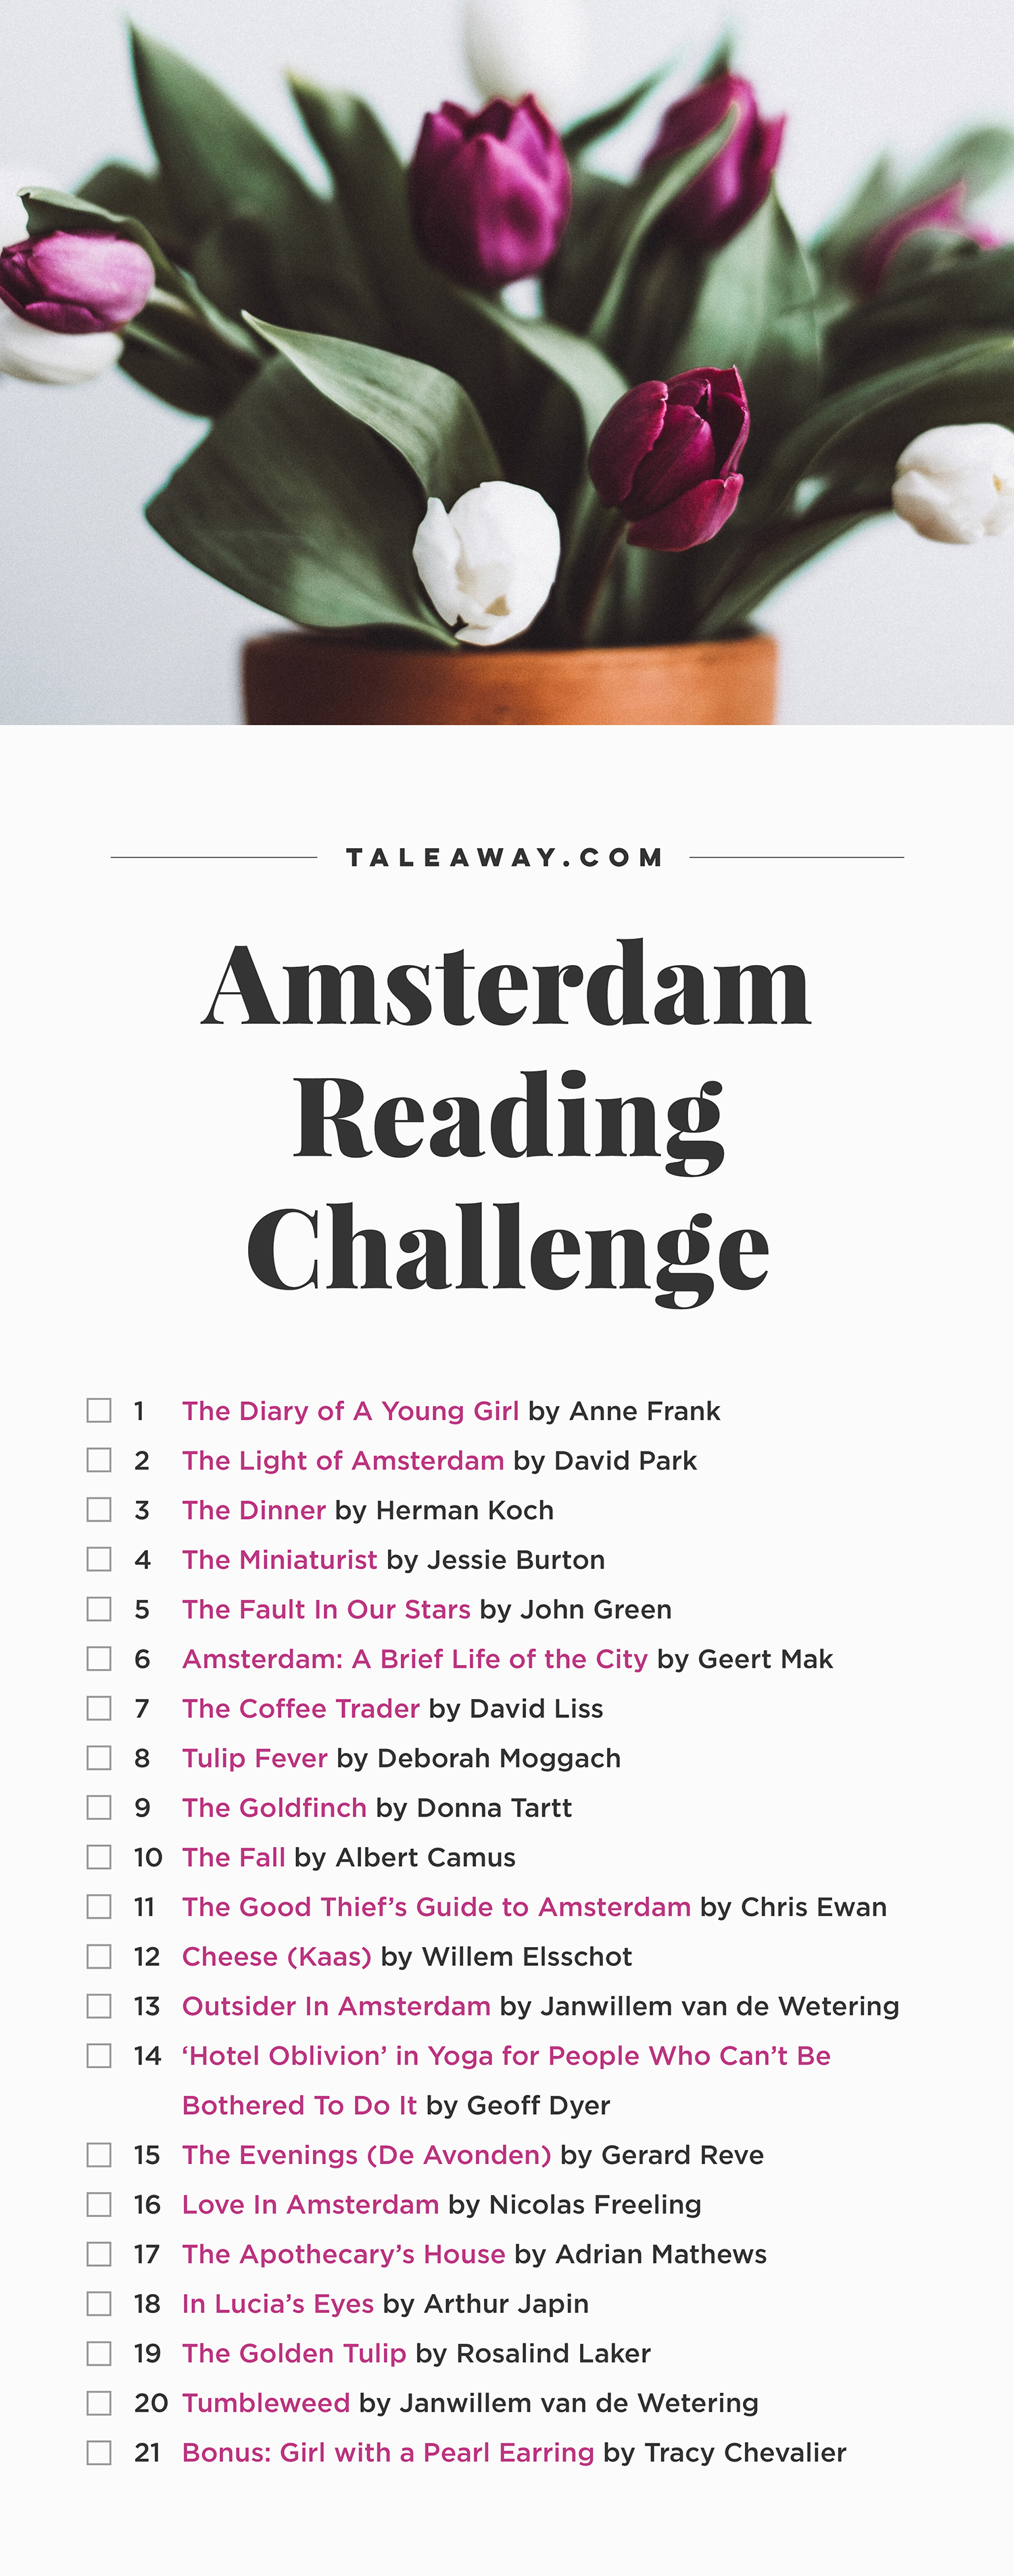 Amsterdam Reading Challenge, Books Set In Amsterdam - For more books visit www.taleway.com to find books set around the world. Ideas for those who like to travel, both in life and in fiction. reading challenge, amsterdam reading challenge, book challenge, books you must read, books from around the world, world books, books and travel, travel reading list, reading list, books around the world, books to read, amsterdam books, amsterdam books novels, amsterdam travel